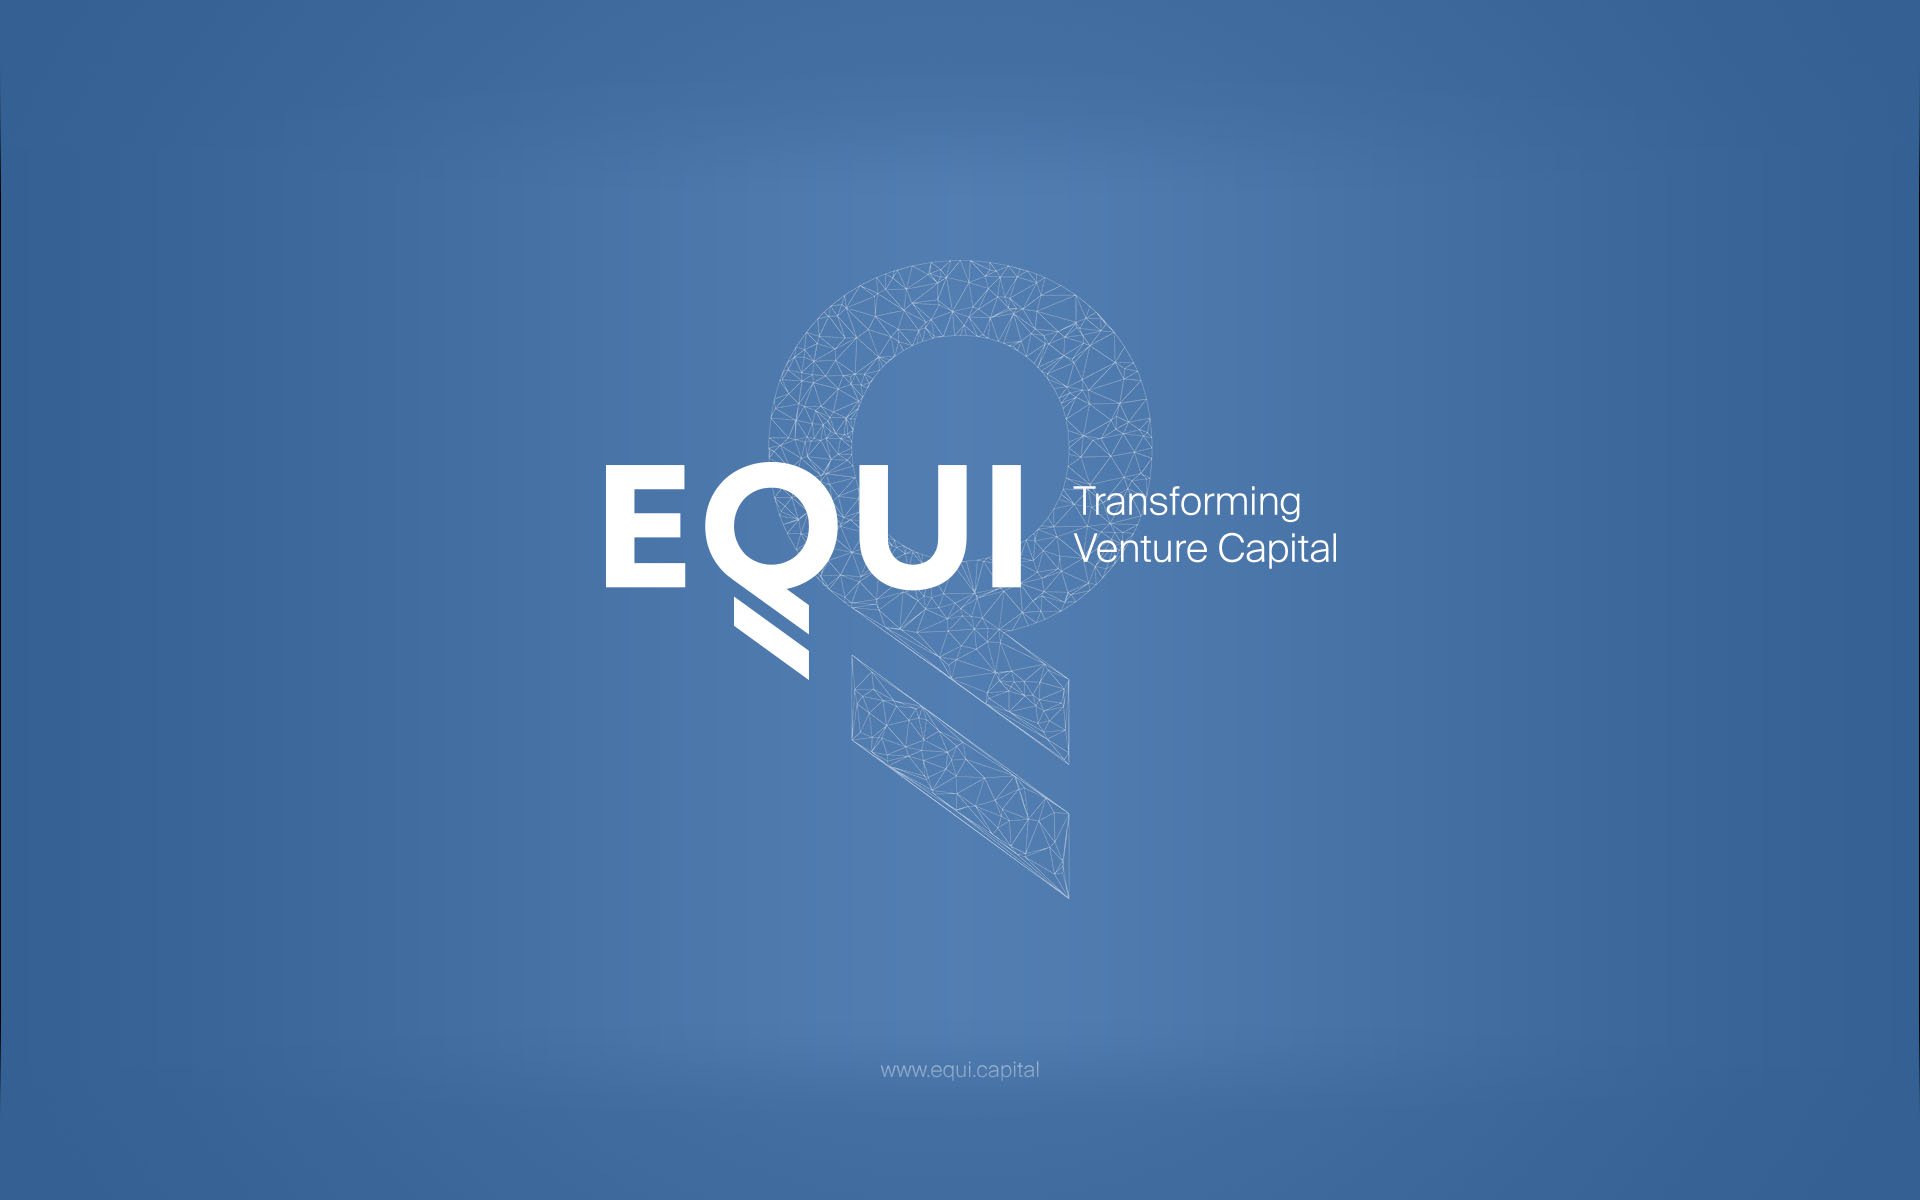 EQUI Raises $7 Million in Only a Few Days of Pre-Sale to Fund Its Mission to Radically Redesign Venture Capital